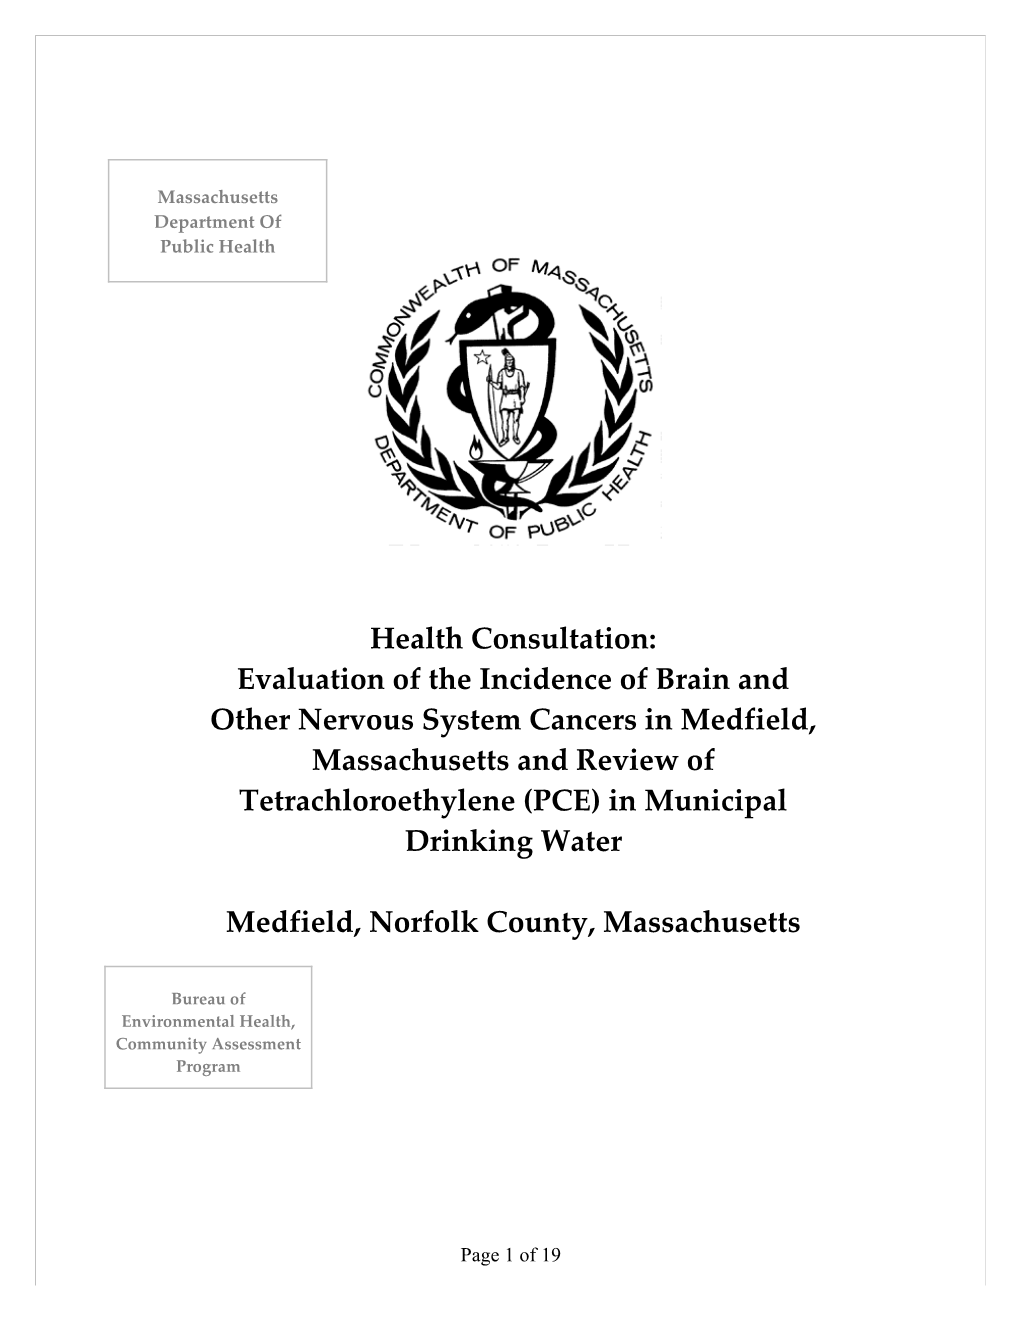 Health Consult - Evaluation of the Incidence of Brain and Other Nervous System Cancers